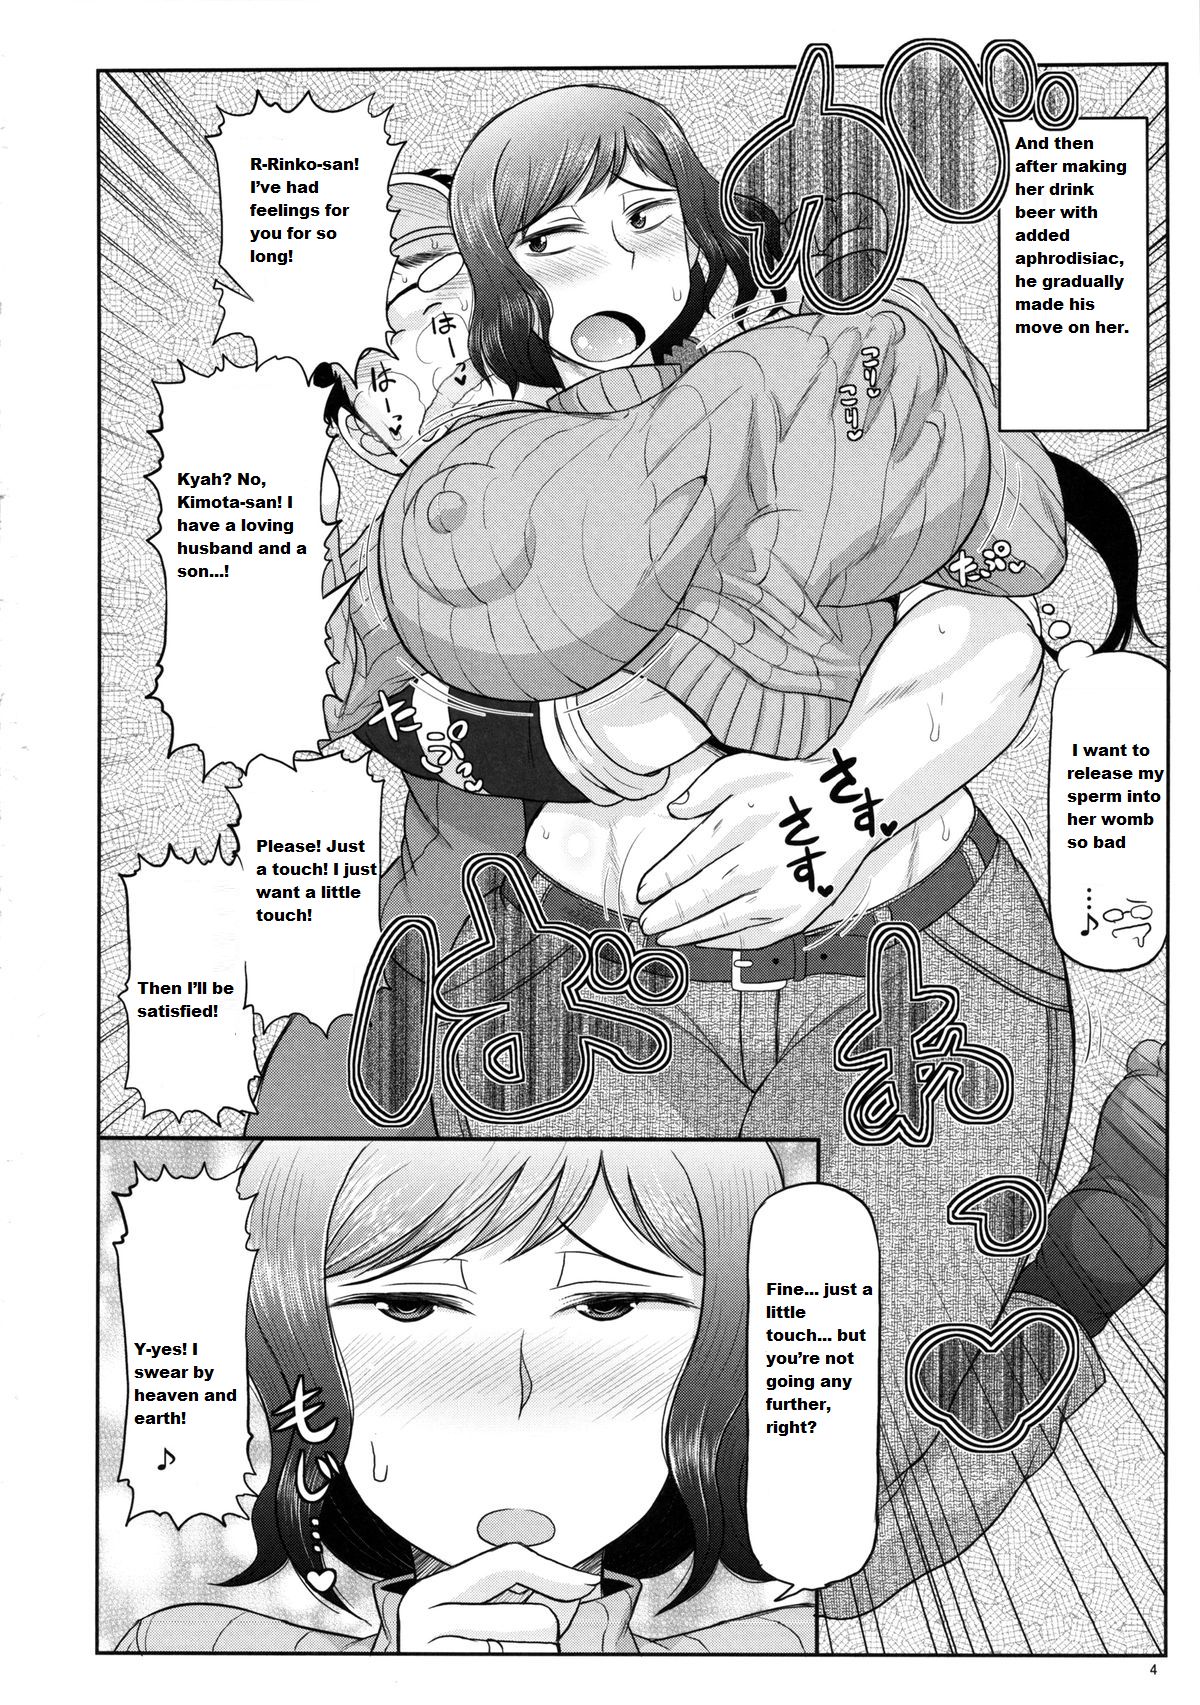 [Great Canyon (Deep Valley)] Love Sperm Rinko-san the huge-breasted MILF gets NTR’d by an ugly fat Gundam Otaku!! It’s a book where he releases his cock-colony into her soft Jaburo pussy and impregnates her with a Newtype Baby. (COMIC1☆8) [グレートキャニオン (ディープバレー)] 愛・精子 爆乳人妻リンコさんがキモデブガノタにNTR!! むっちむちジャブローまんこにチンポコロニー堕としをドッピュンされてニュータイプベイビーを孕んじゃう本。 (ガンダムビルドファイターズ) [英訳]